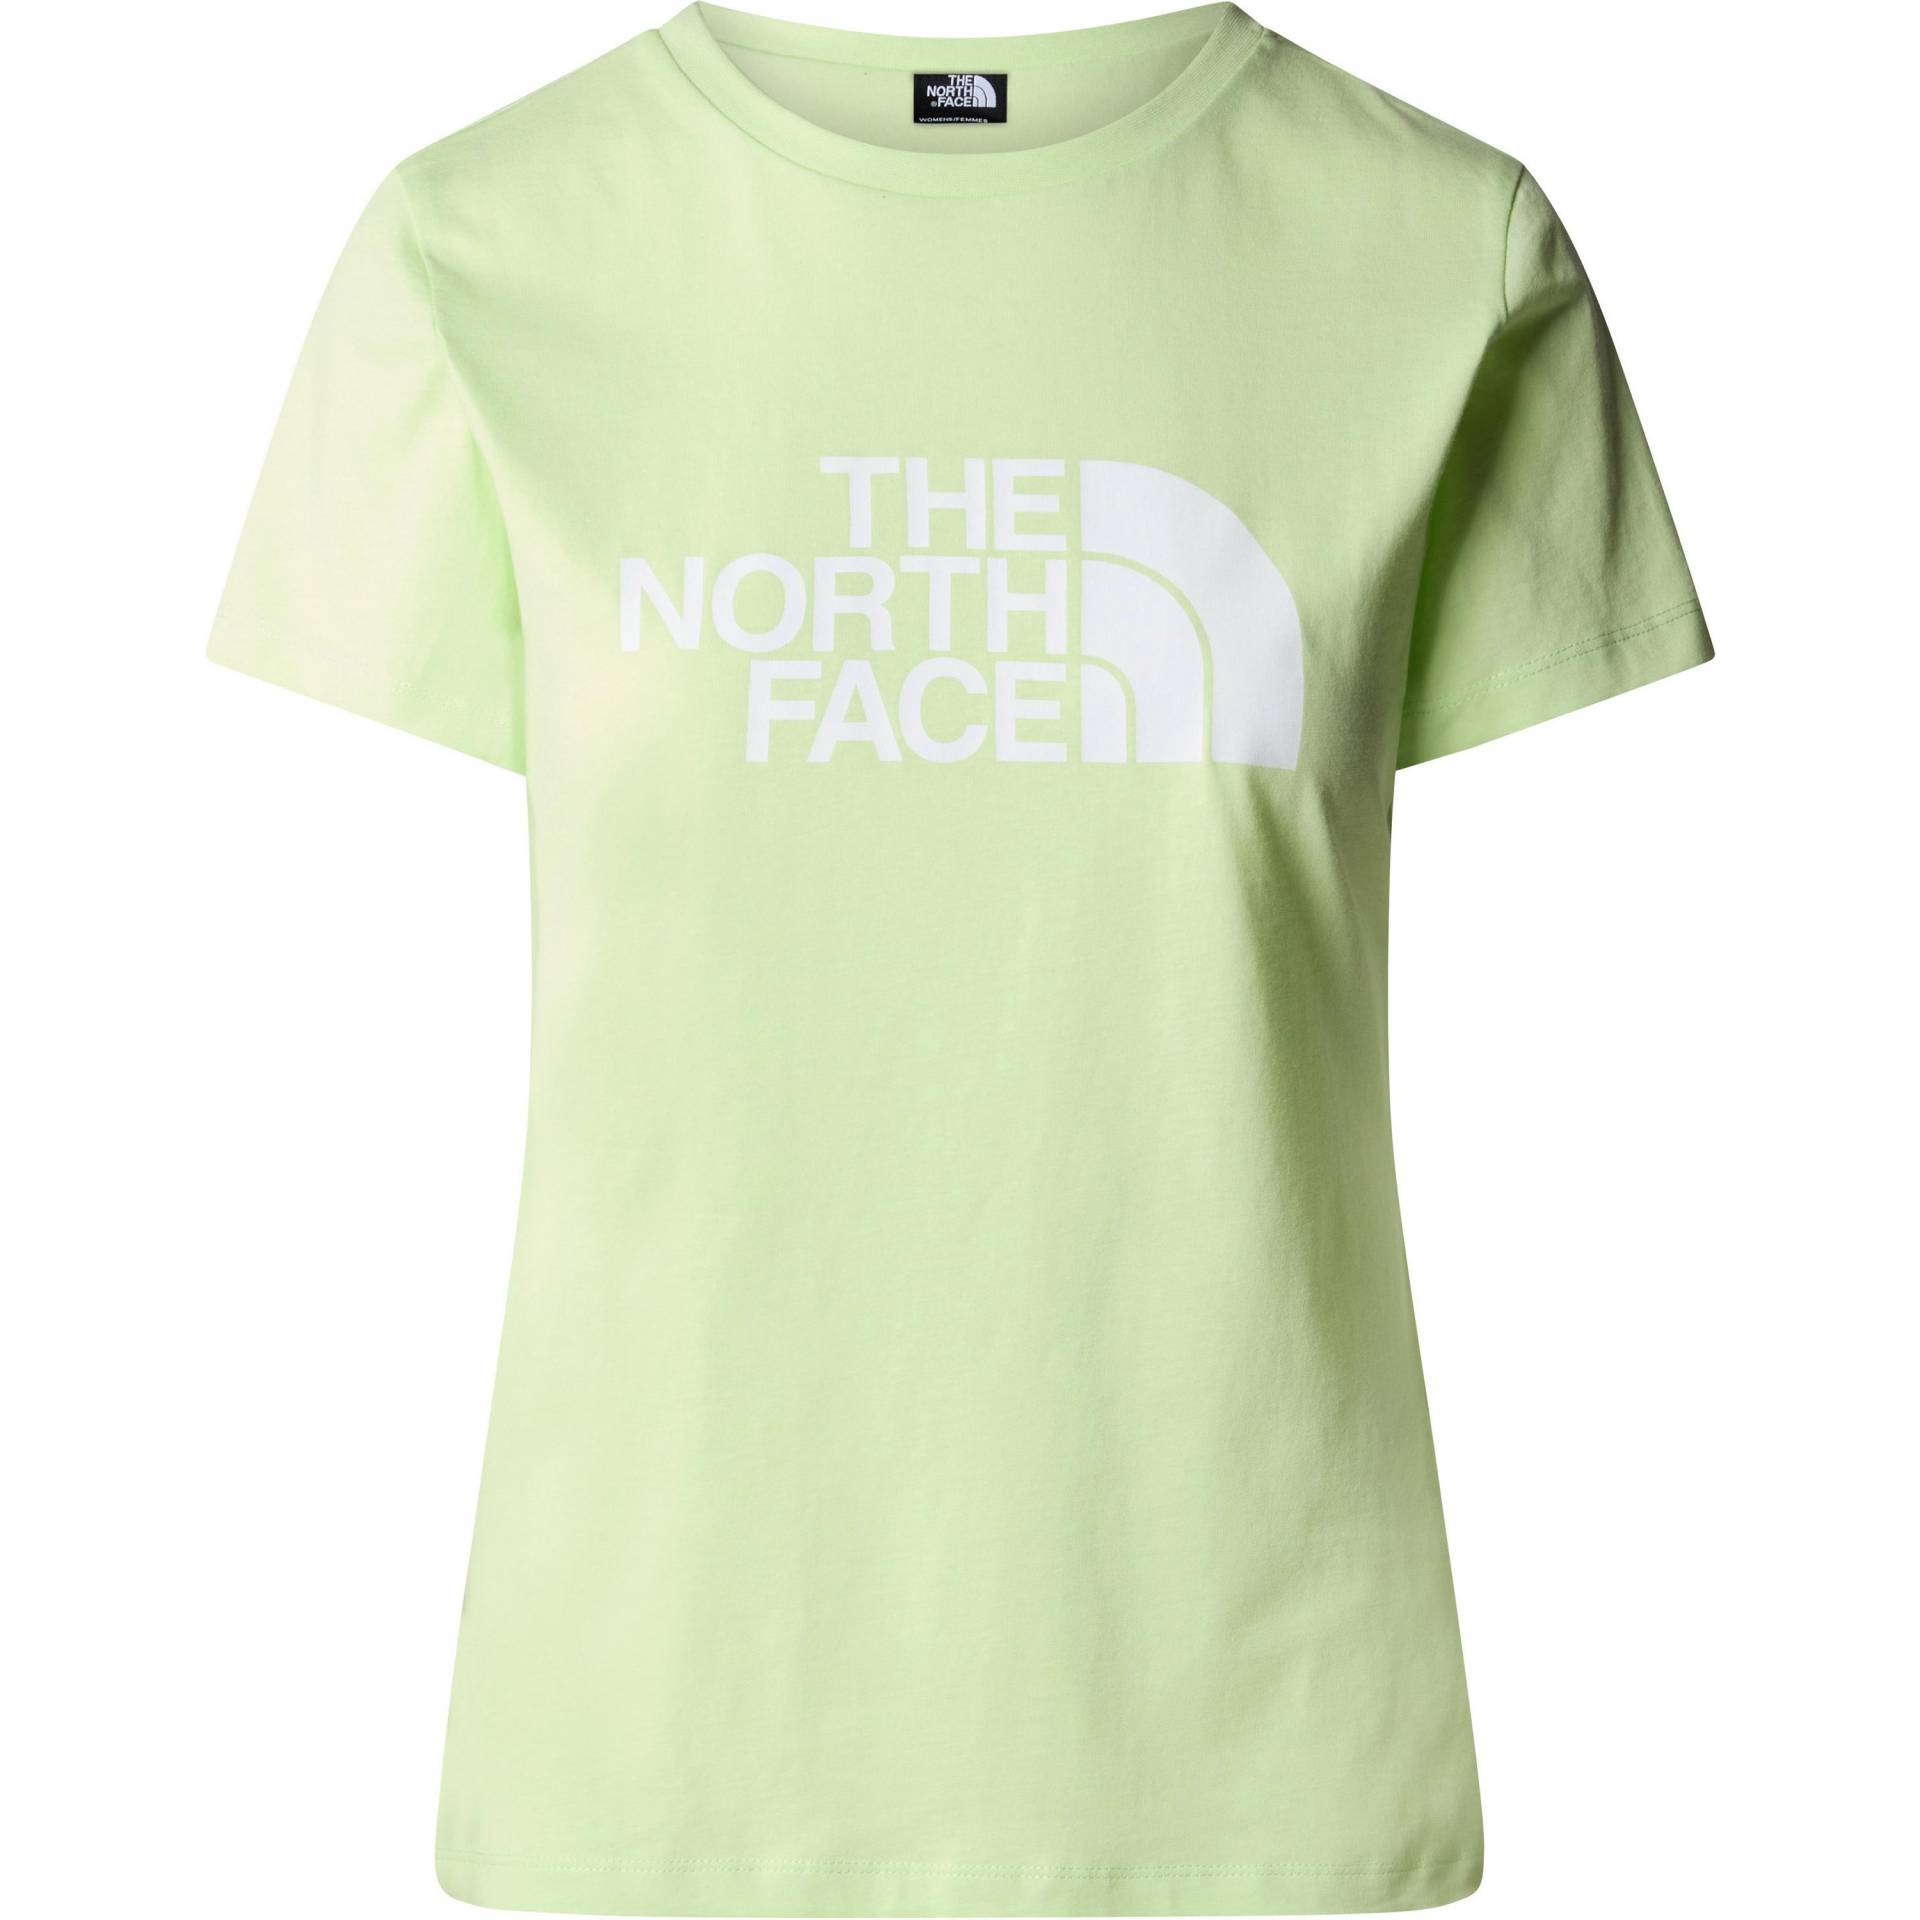 The North Face EASY T-Shirt Damen von The North Face